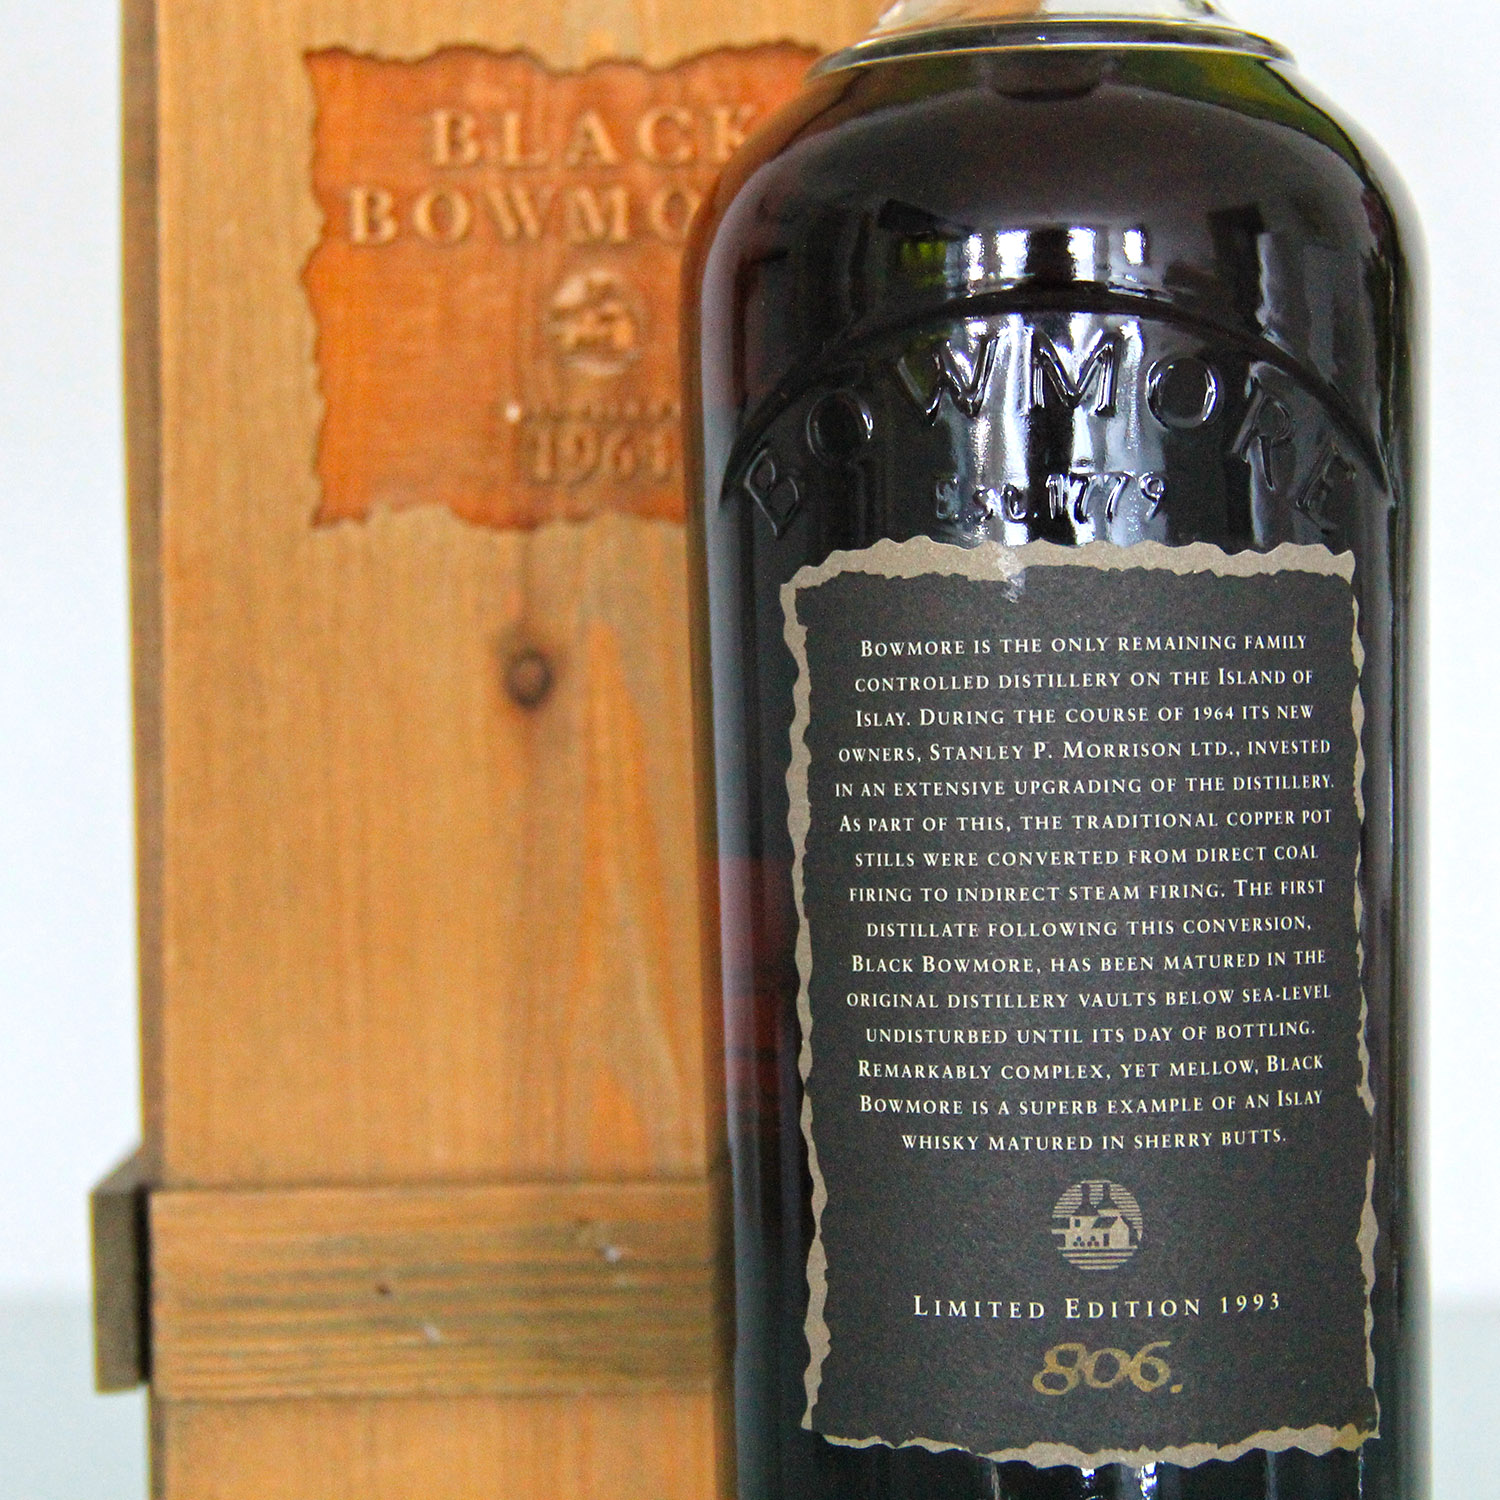 Black Bowmore 1964 29 Years Old 1st Edition back label